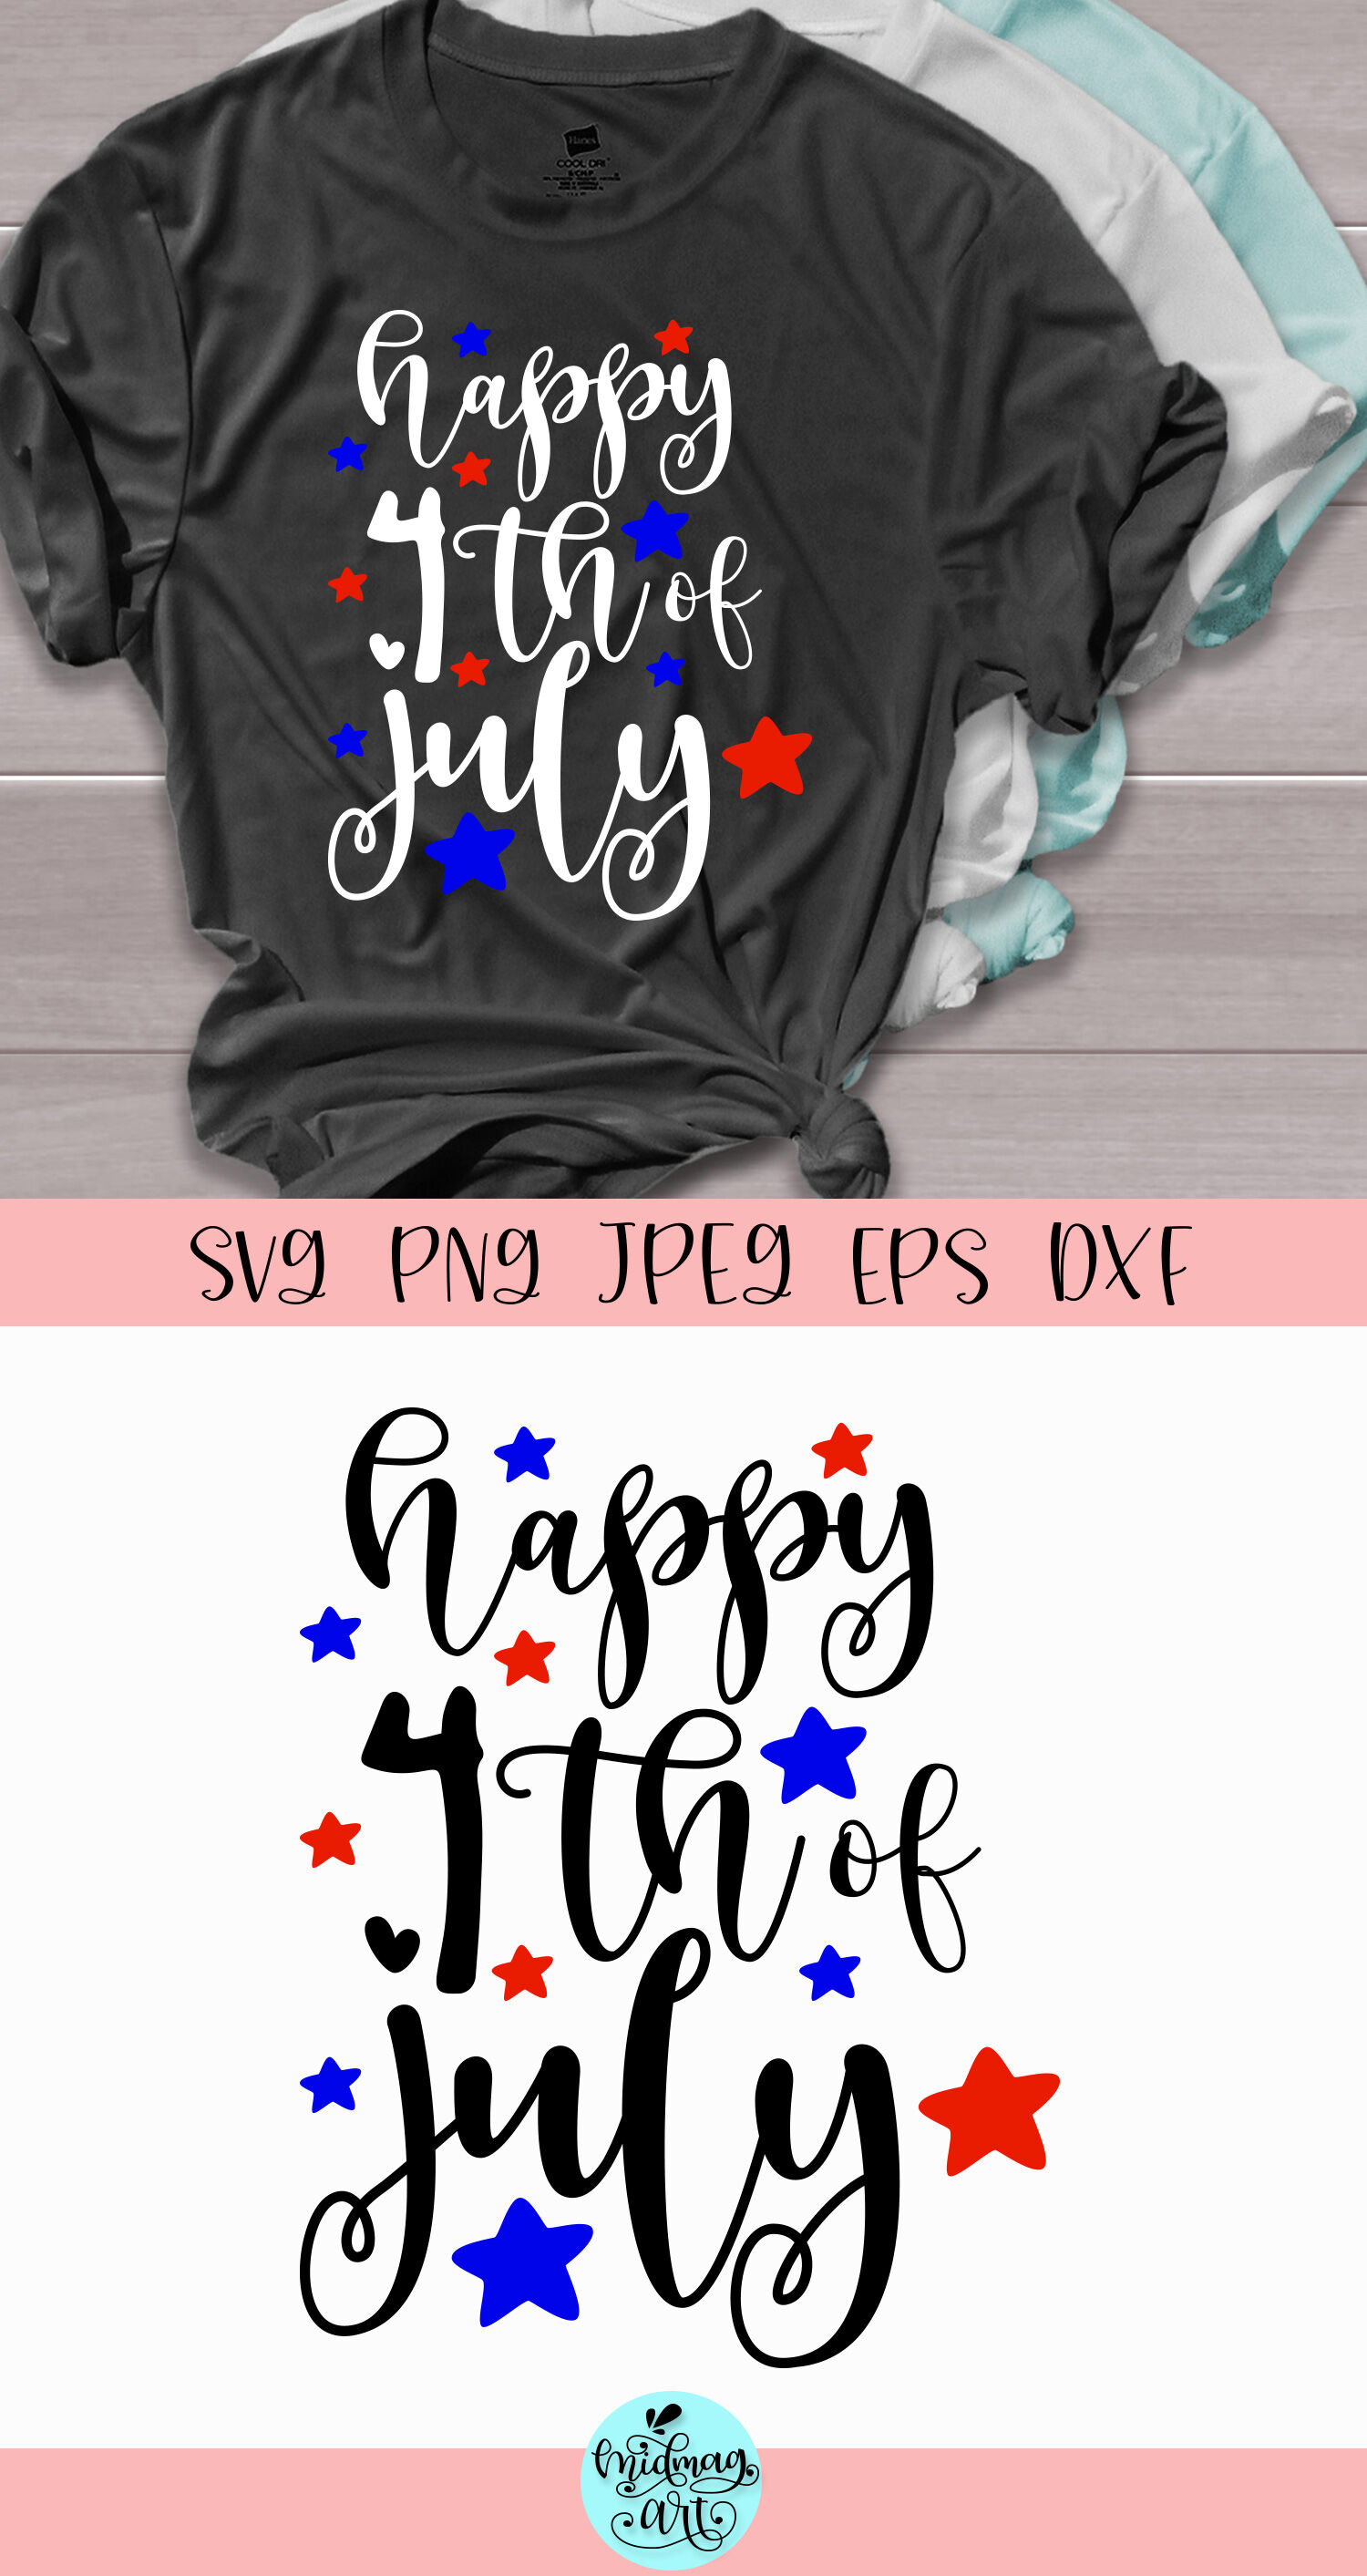 Happy 4th of july svg, 4th of july svg By Midmagart | TheHungryJPEG